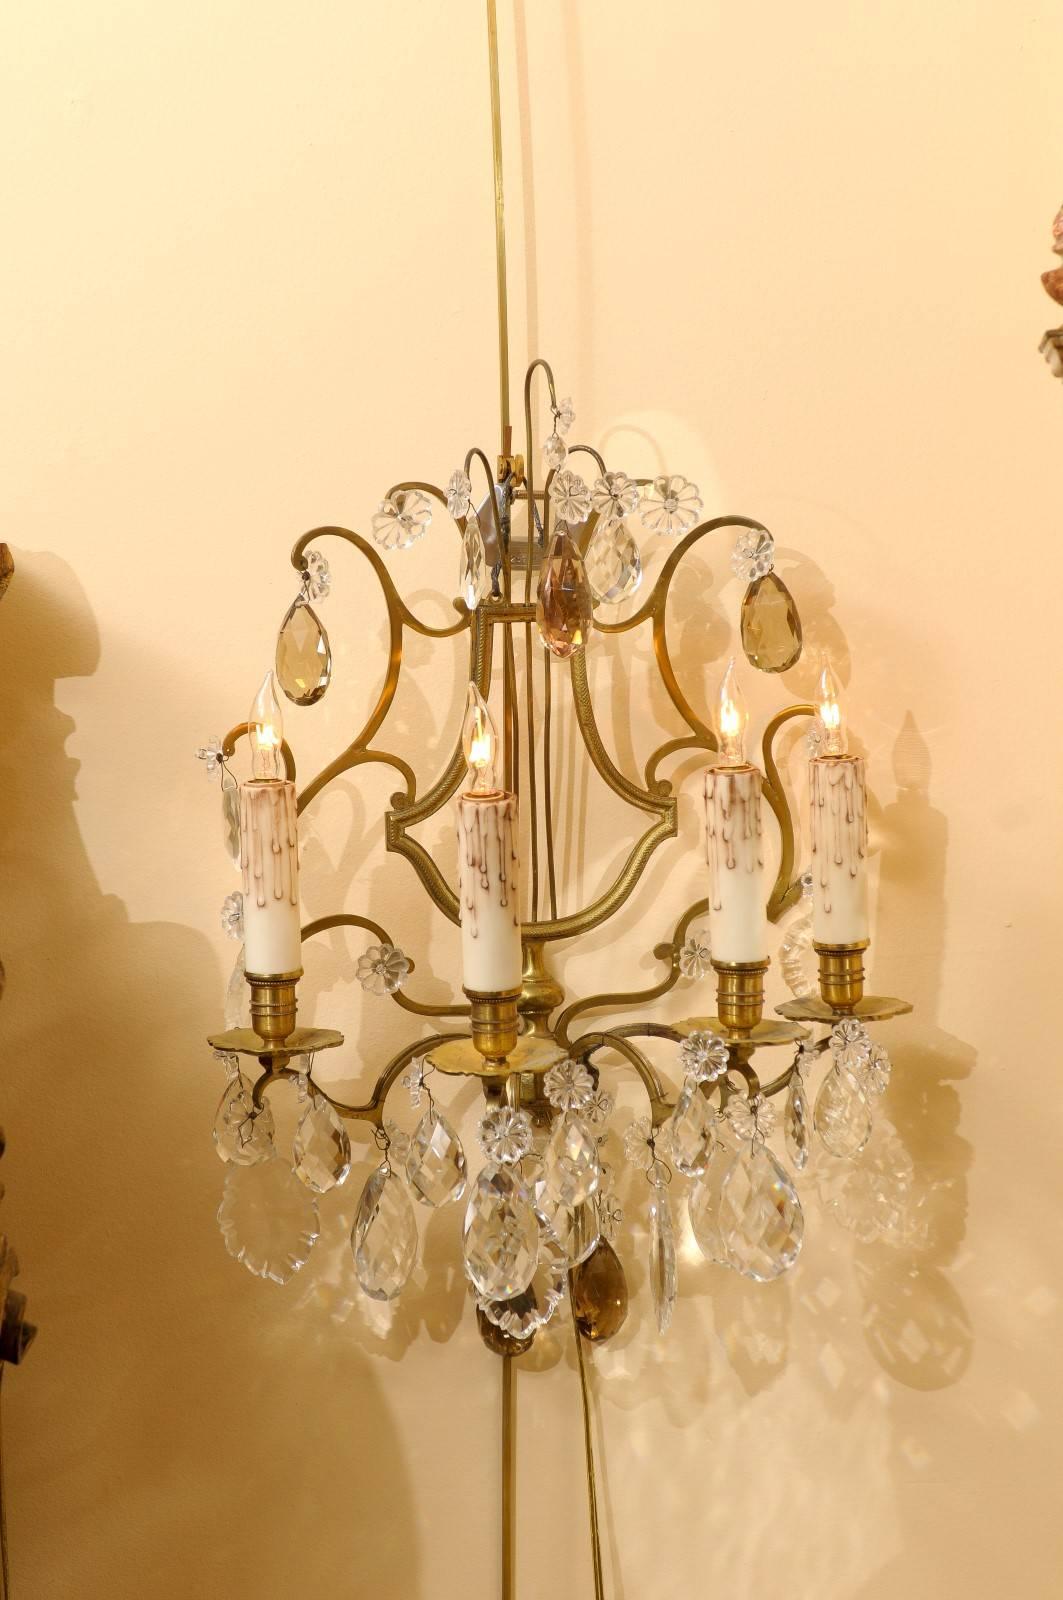 Pair of French 4-Light Lyre Brass Sconces with Amber Crystals, 19th Century For Sale 3